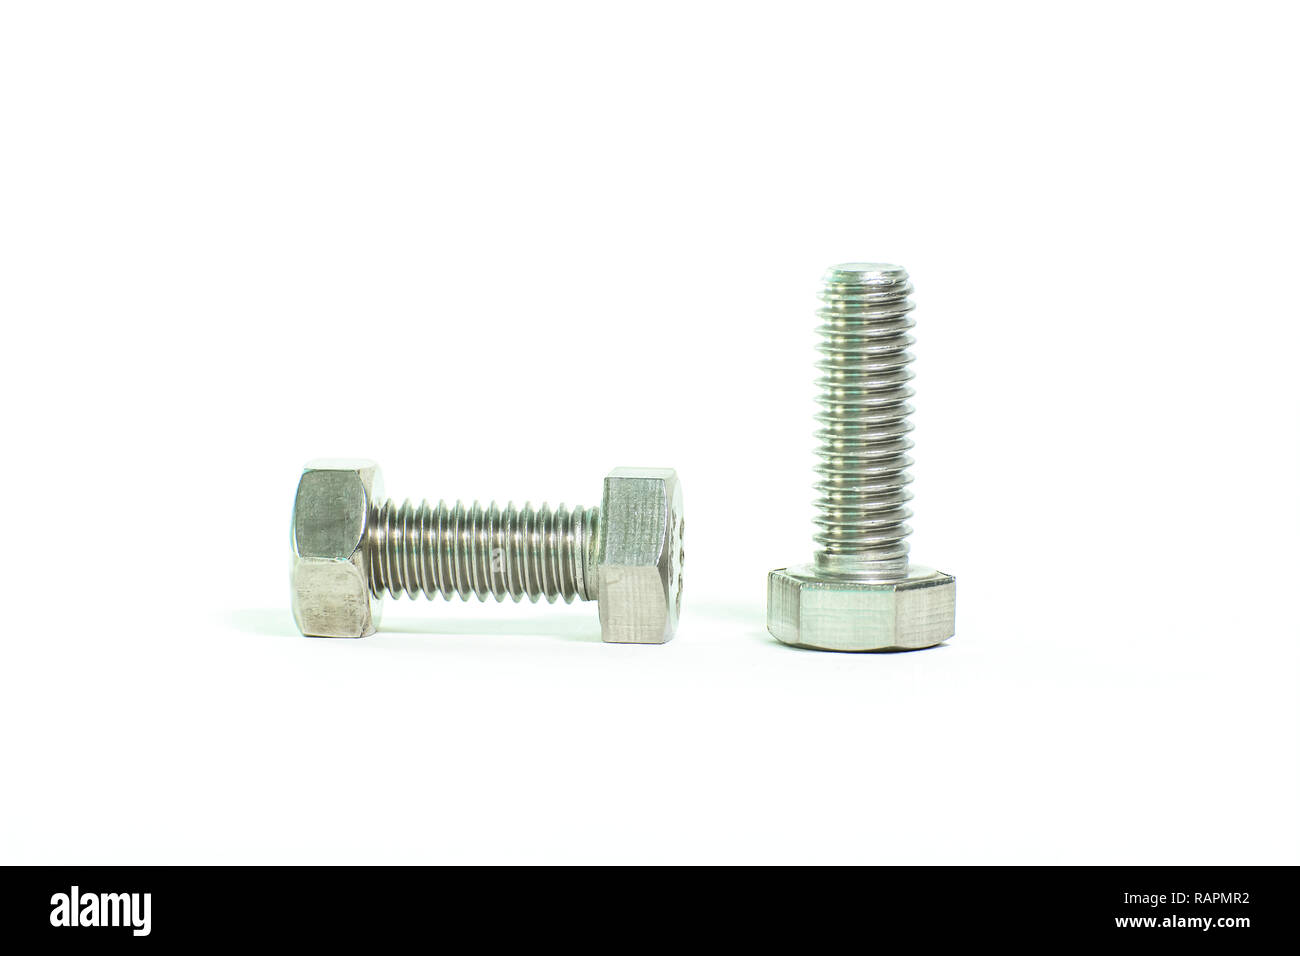 Hex head screw on a white background. Stock Photo